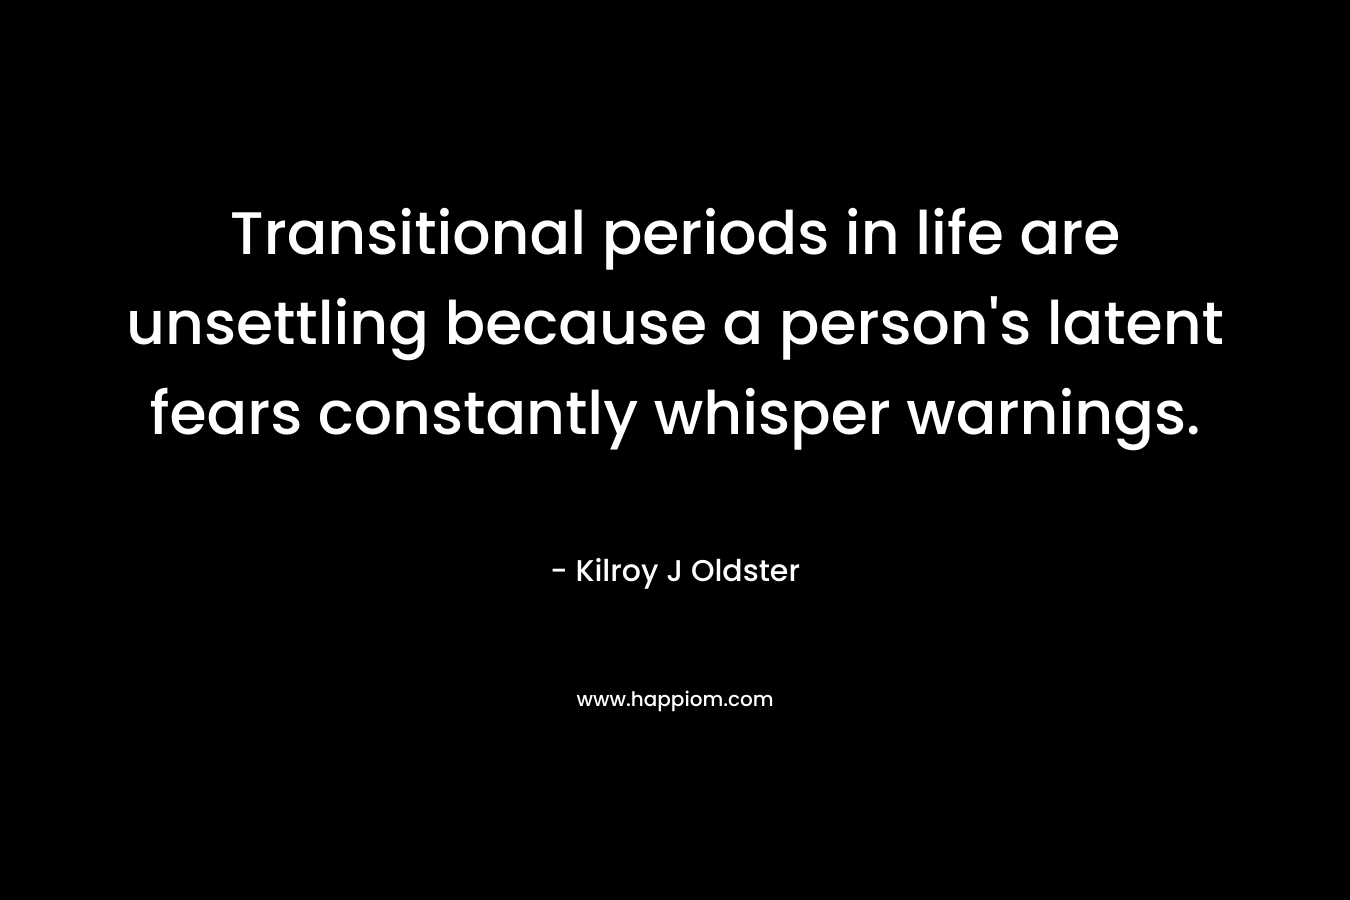 Transitional periods in life are unsettling because a person’s latent fears constantly whisper warnings. – Kilroy J Oldster